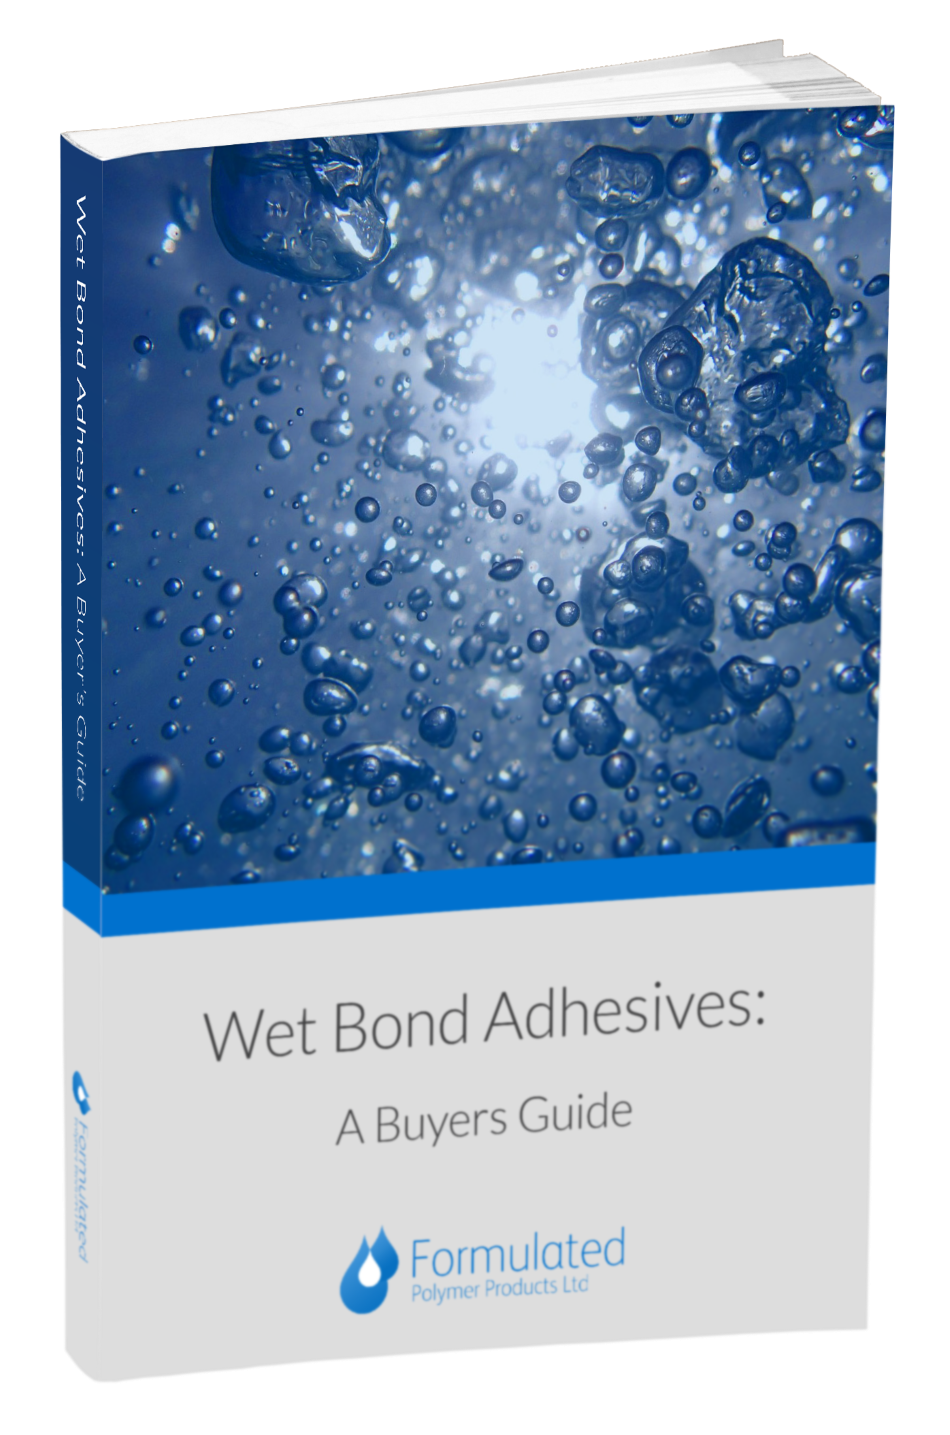 Wet Bond Adhesives - A Buyers Guide.png